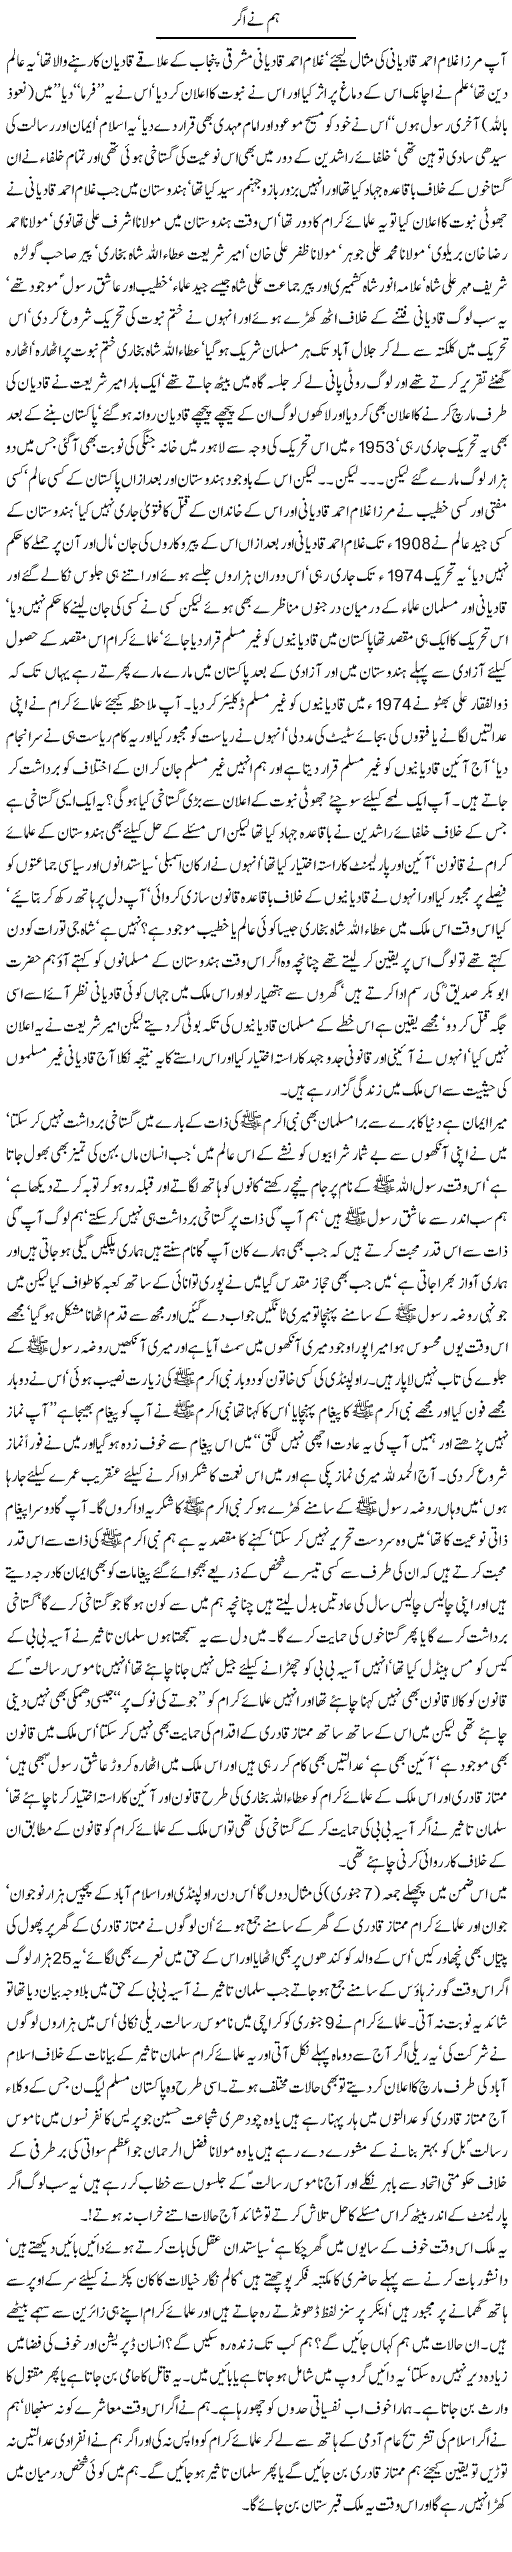 Toheen-e-Risalat laws and issues, column about personalities by Javed-Chaudhry